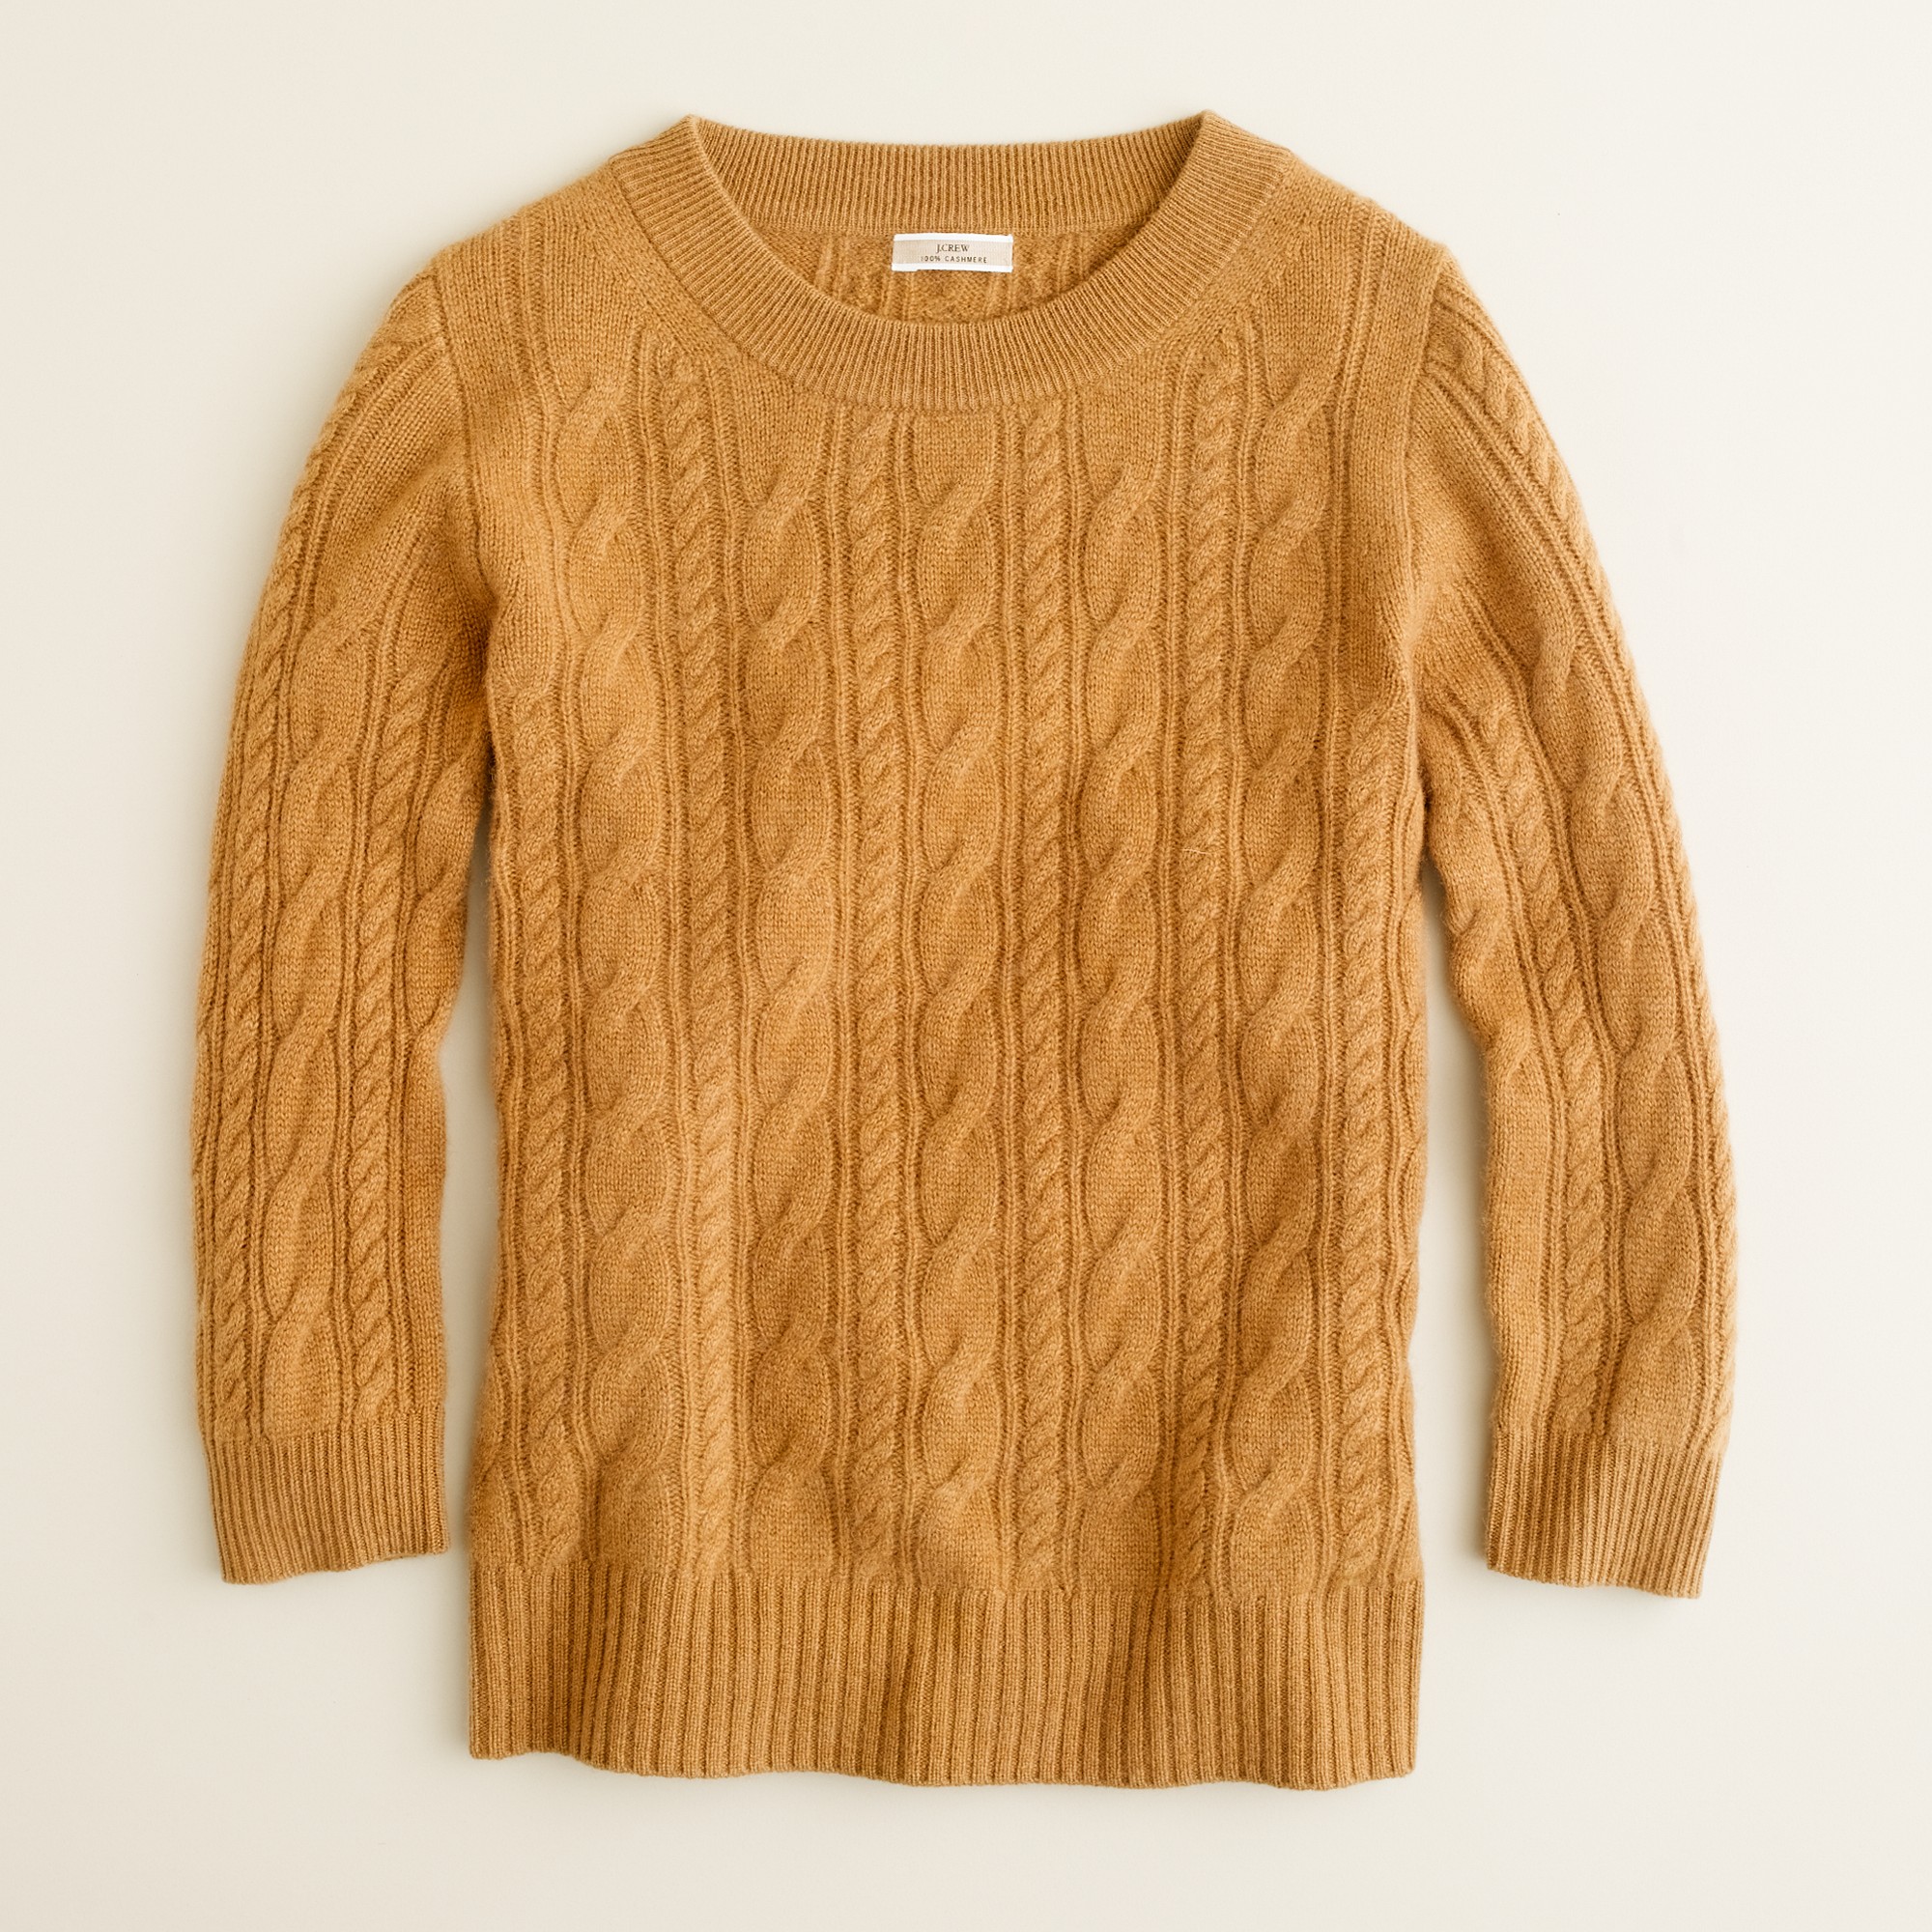 J.crew Cashmere Cable Sweater in Brown | Lyst